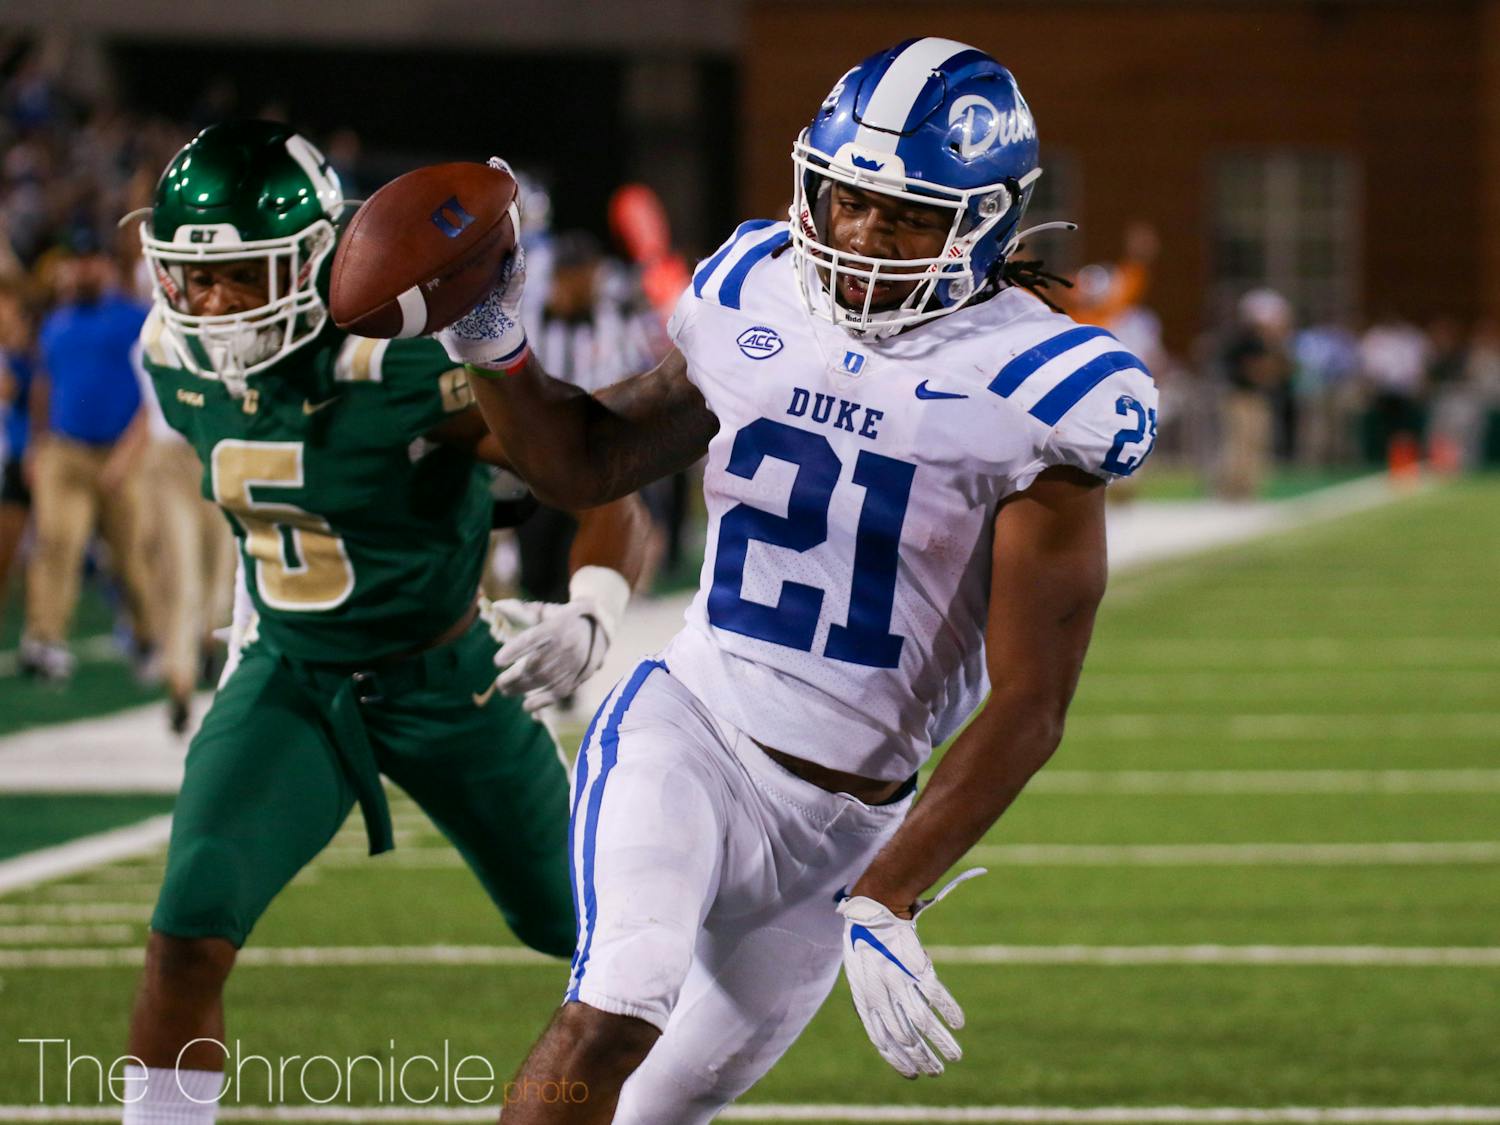 Their first game of the season, the Duke Blue Devils visited UNC Charlotte to play the 49ers. &nbsp;With a tight game, the 49ers won 31-28. Photos by staff photographer Simran Prakash.&nbsp;